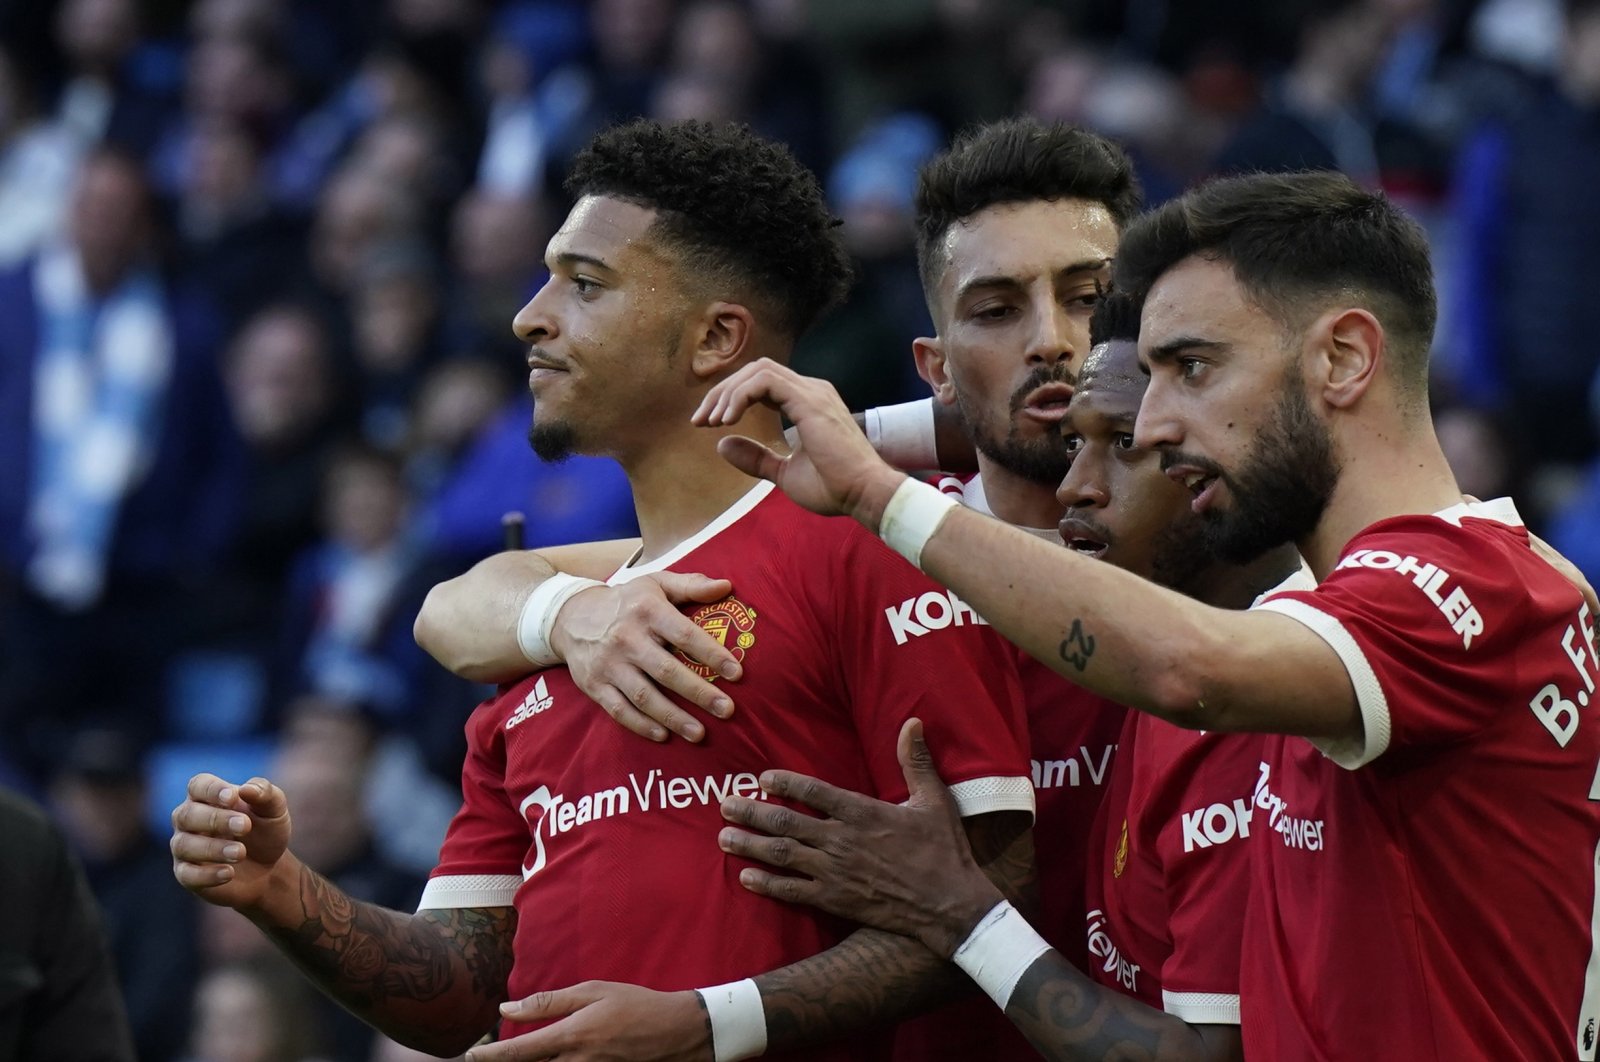 Manchester United players celebrate a goal during a Premier League match against Manchester City at the Etihad Stadium in Manchester, Britain, March 6, 2022. (EPA Photo)
